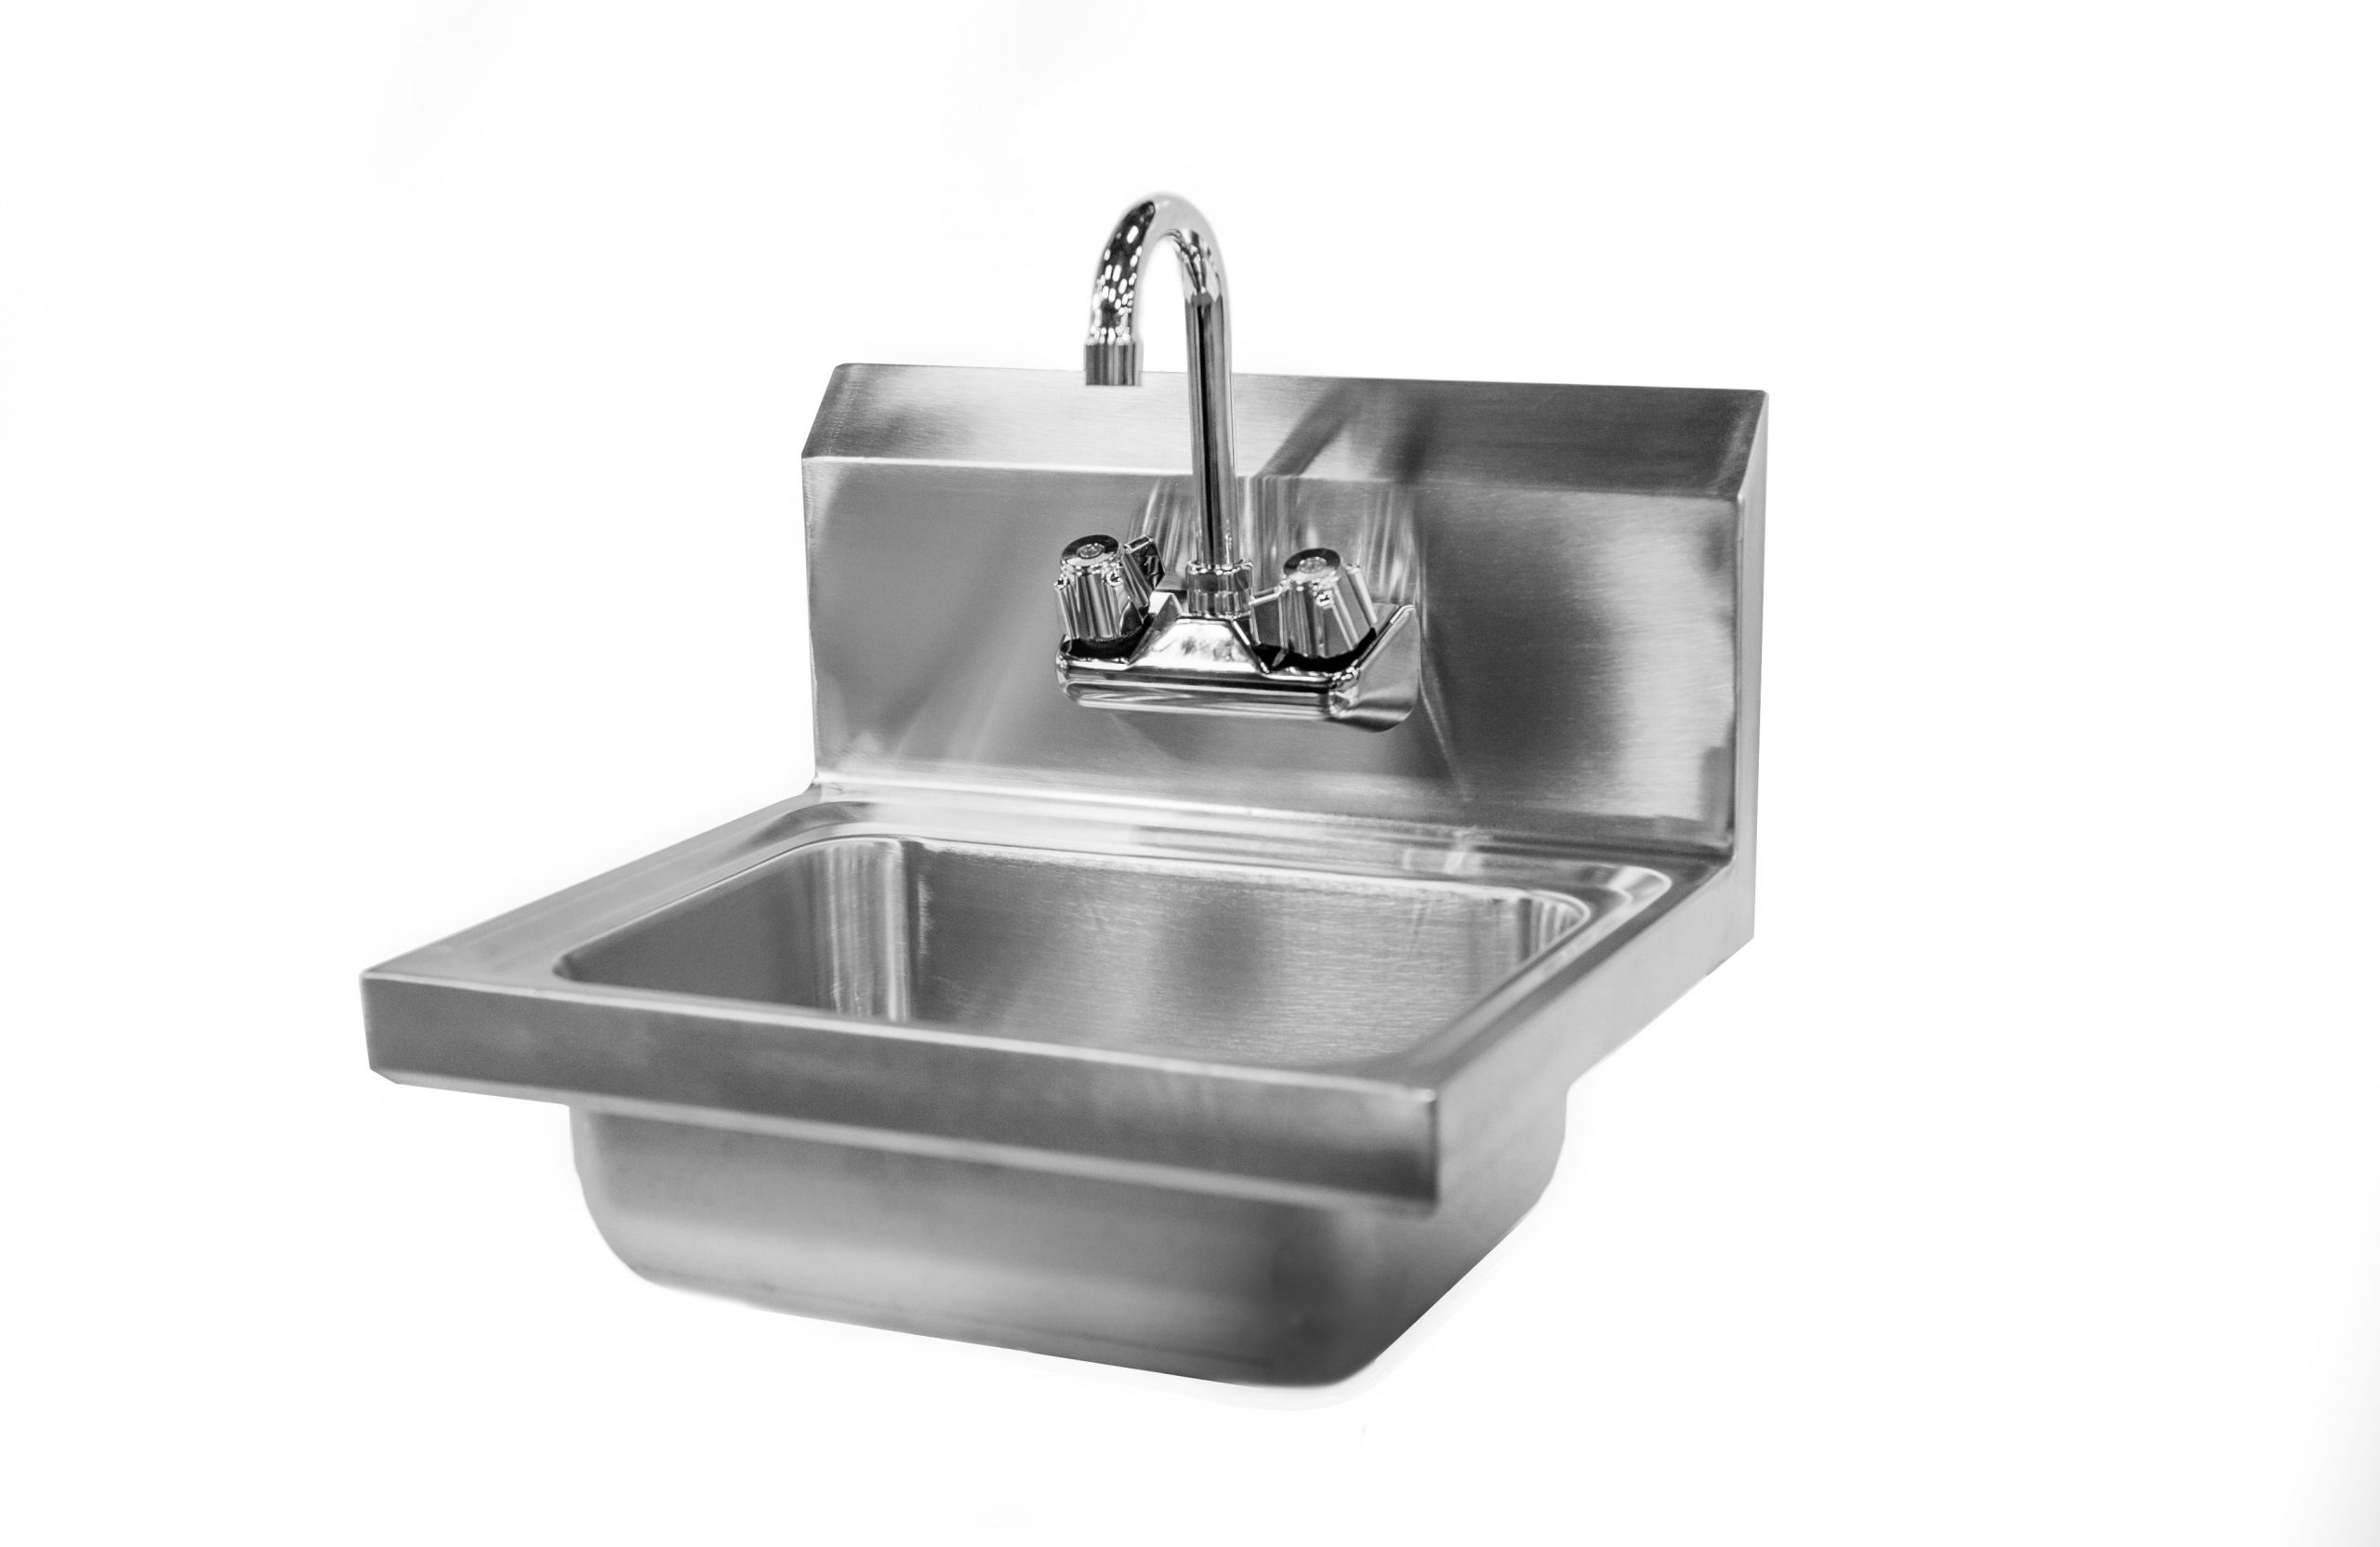 lowes commercial kitchen hand washing sink